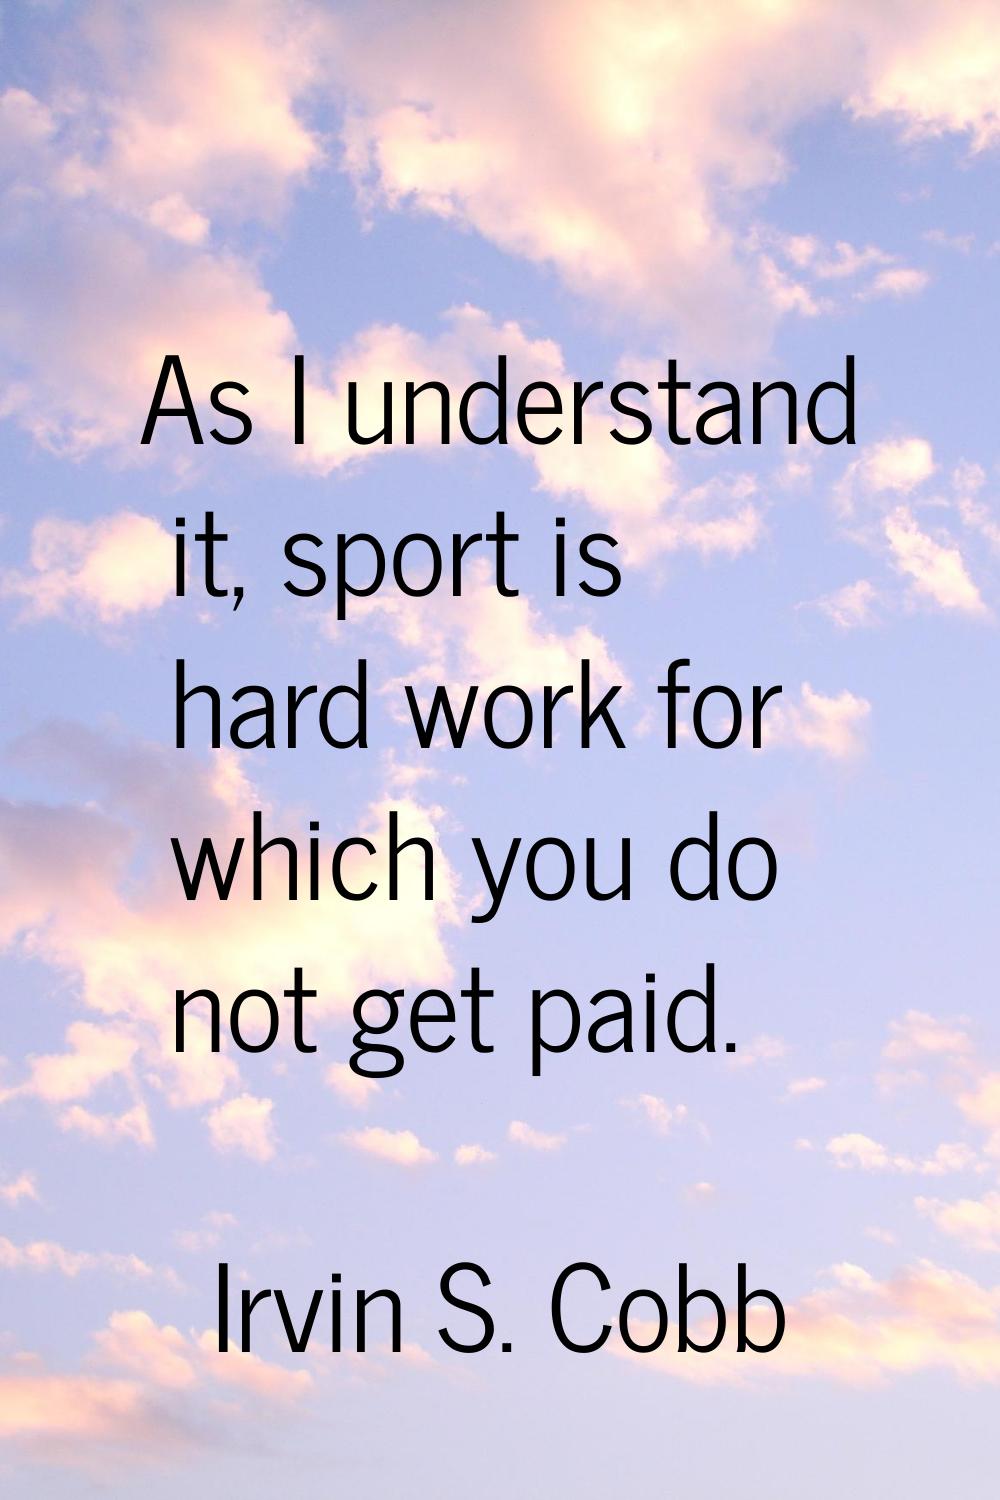 As I understand it, sport is hard work for which you do not get paid.